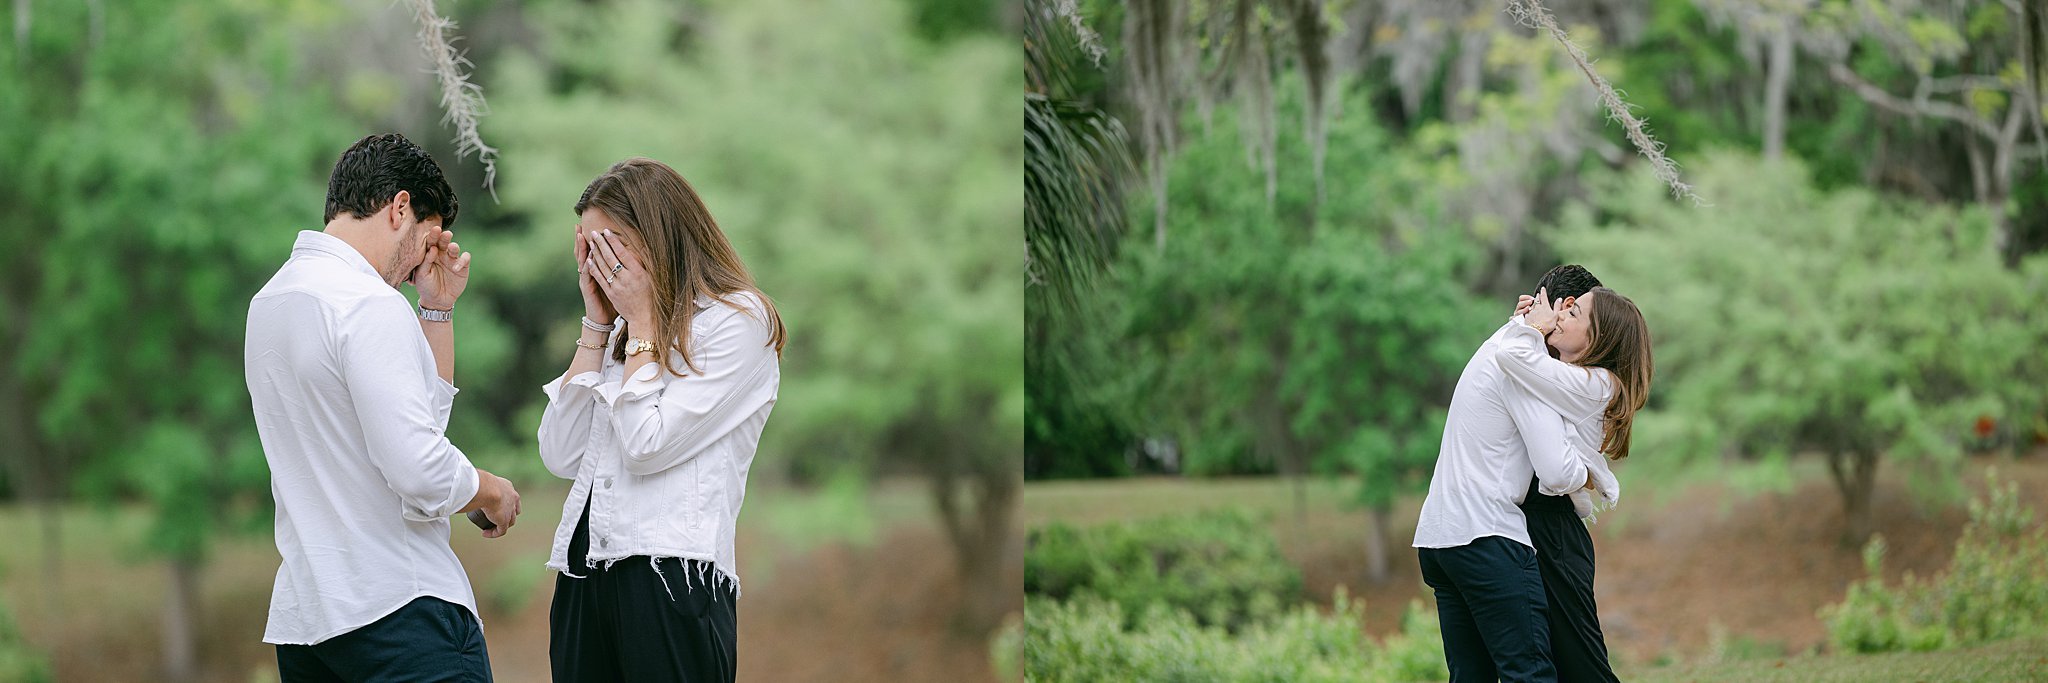 Katherine_Ives_Photography_Surprise_Proposal_Montage_Palmetto_Bluff__Session_72595.JPG